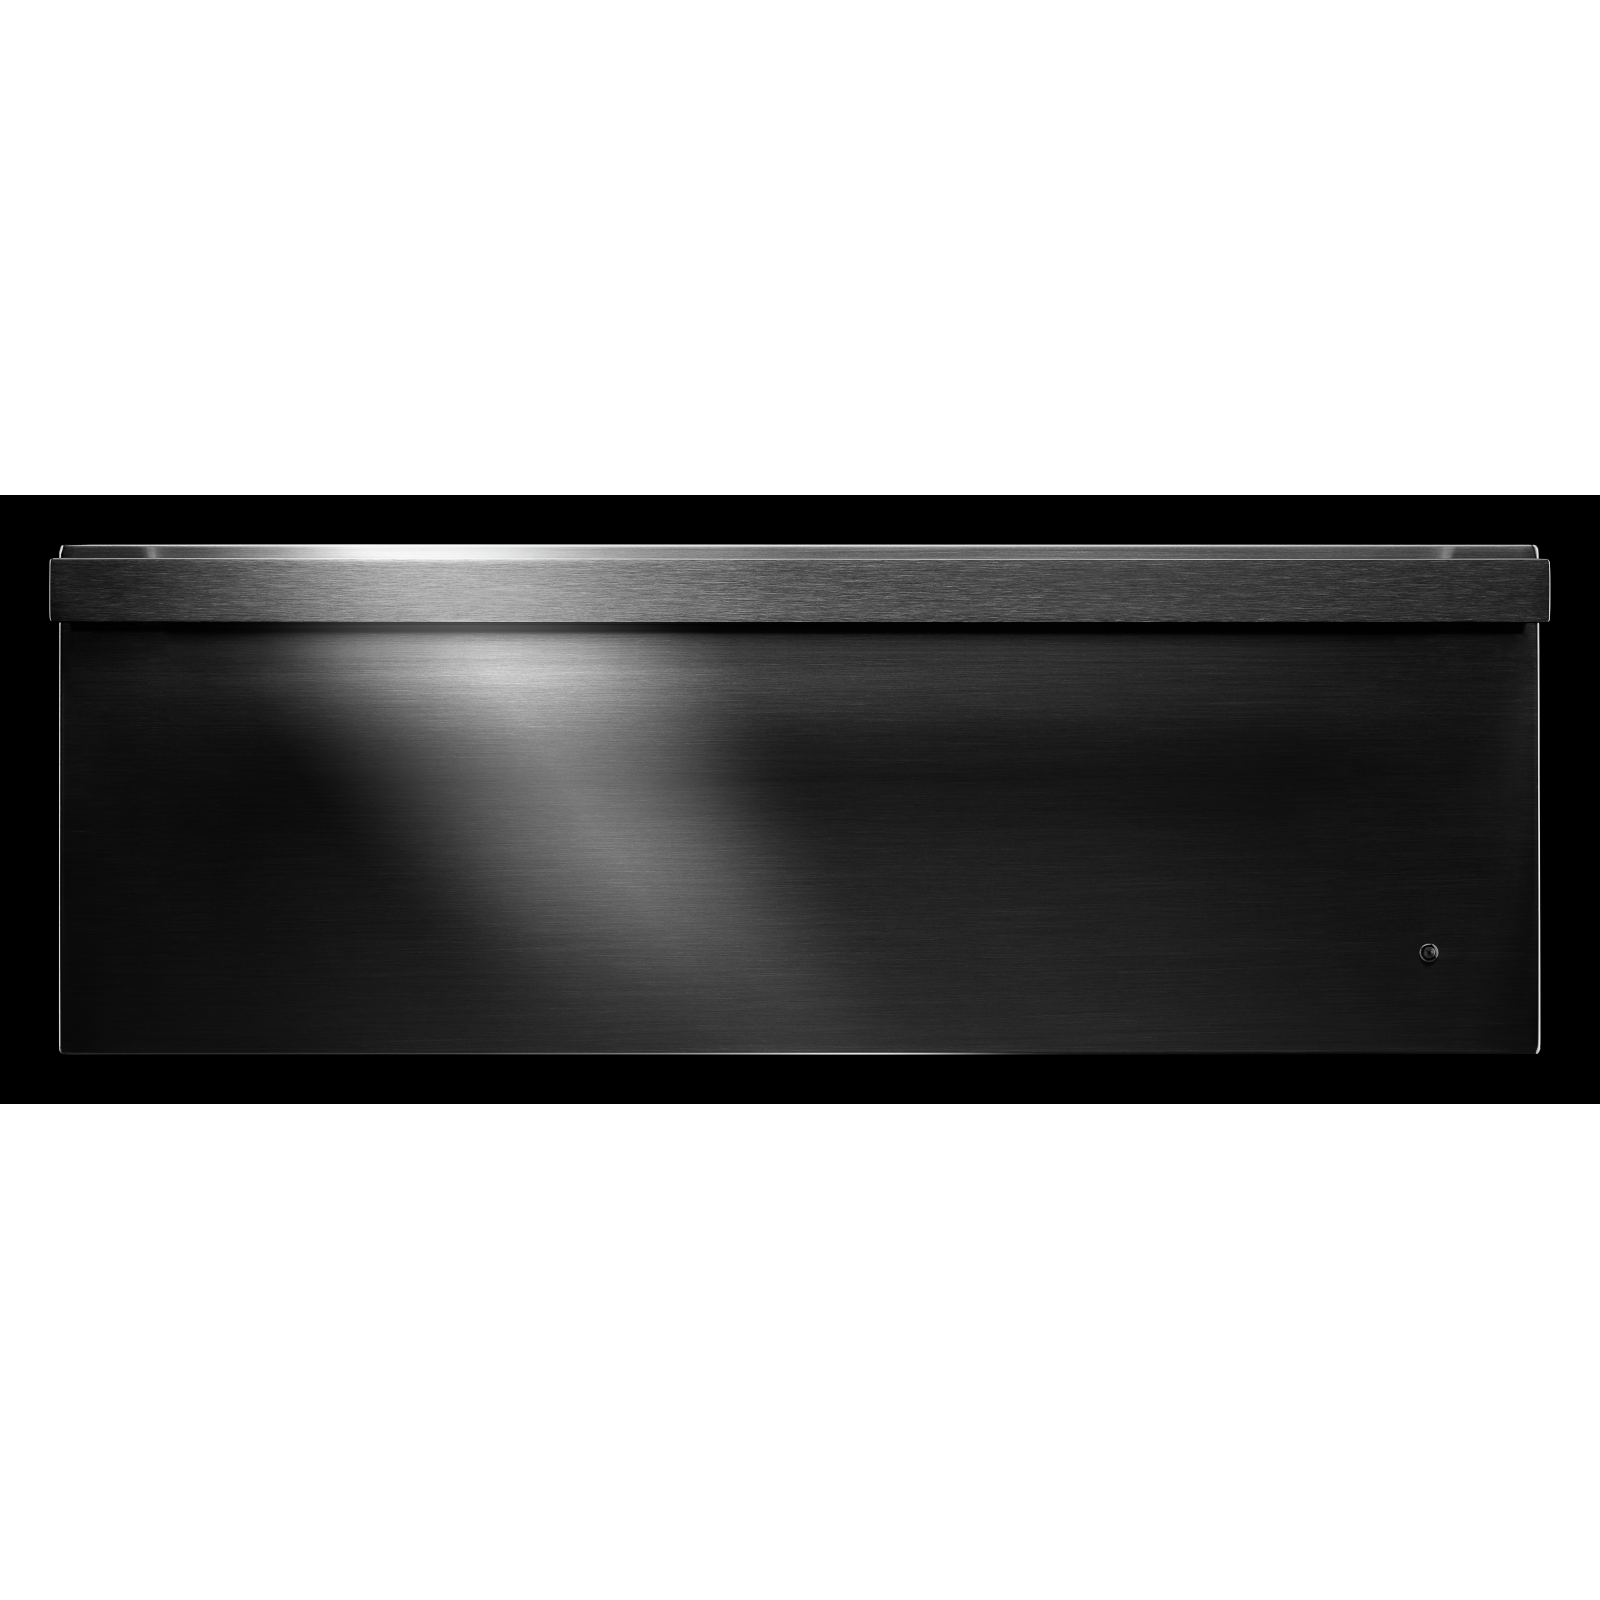 JennAir - 1.5 cu. ft Warming Drawer Wall Oven in Stainless - JJD3030IM